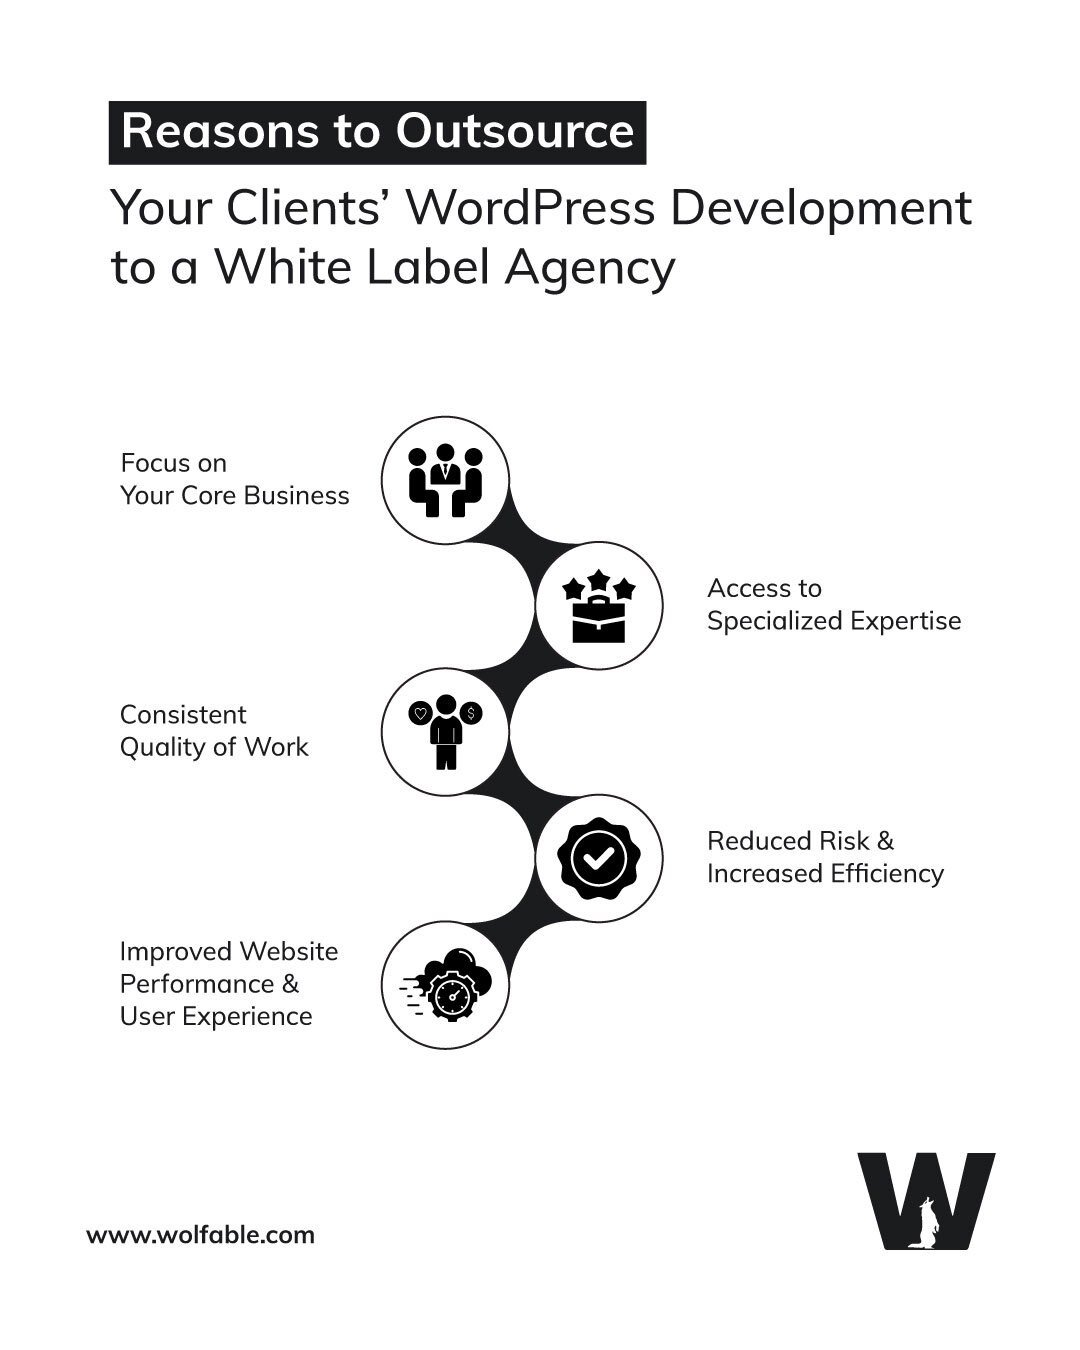 Reasons-to-Outsource-Your-Client’s-WordPress-Development-to-a-White-Label-Agency